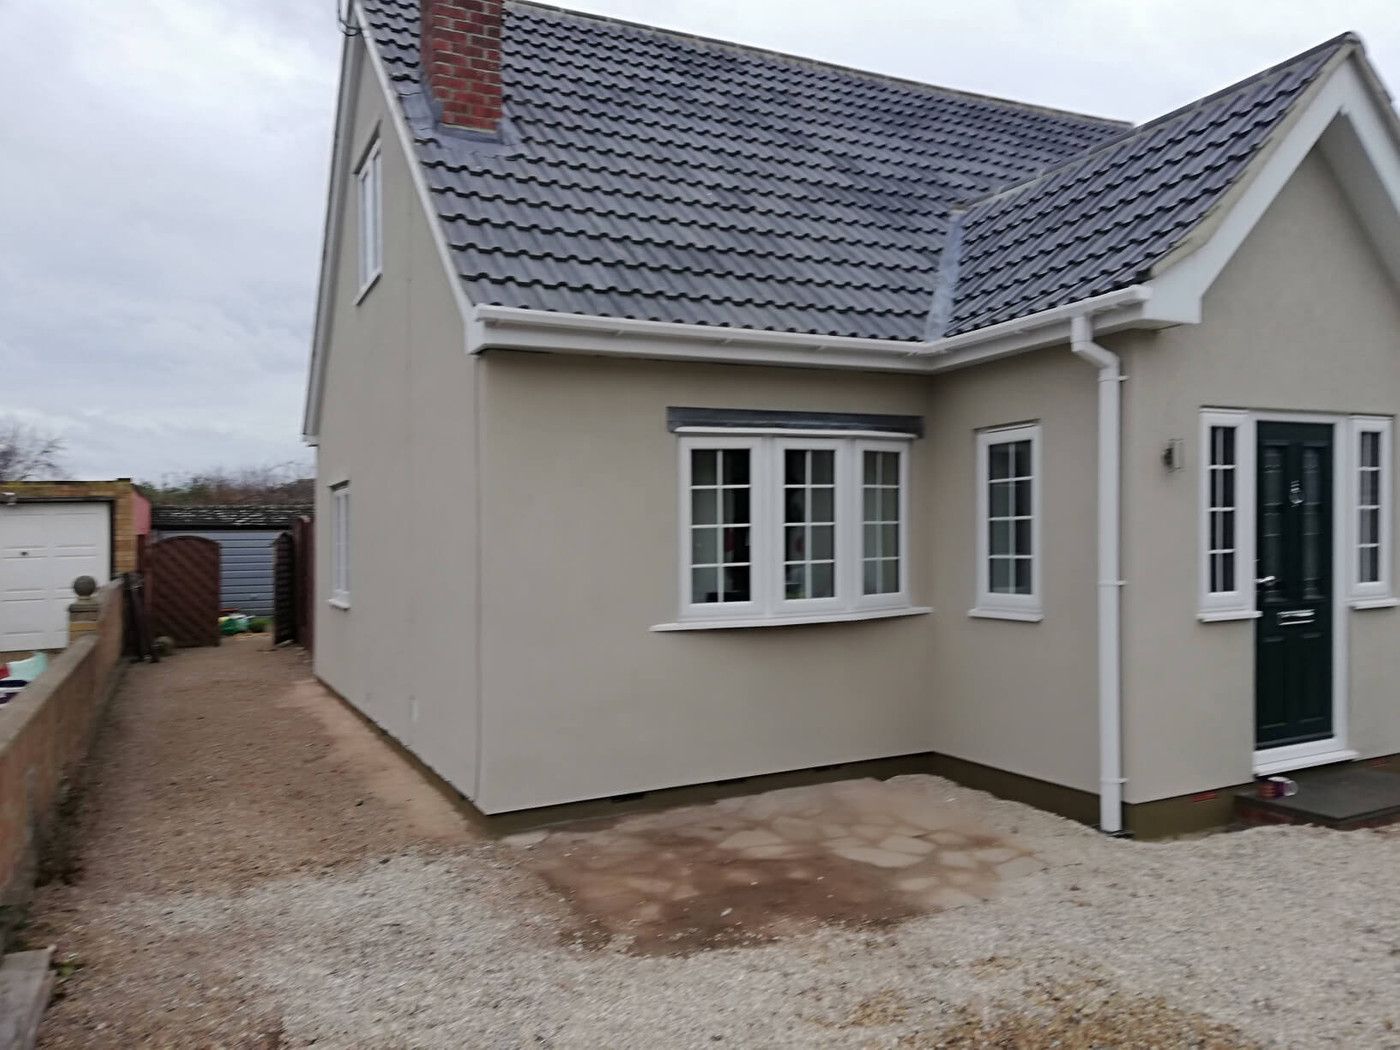 Example of a domestic rendering project completed by R. Fulcher & Sons